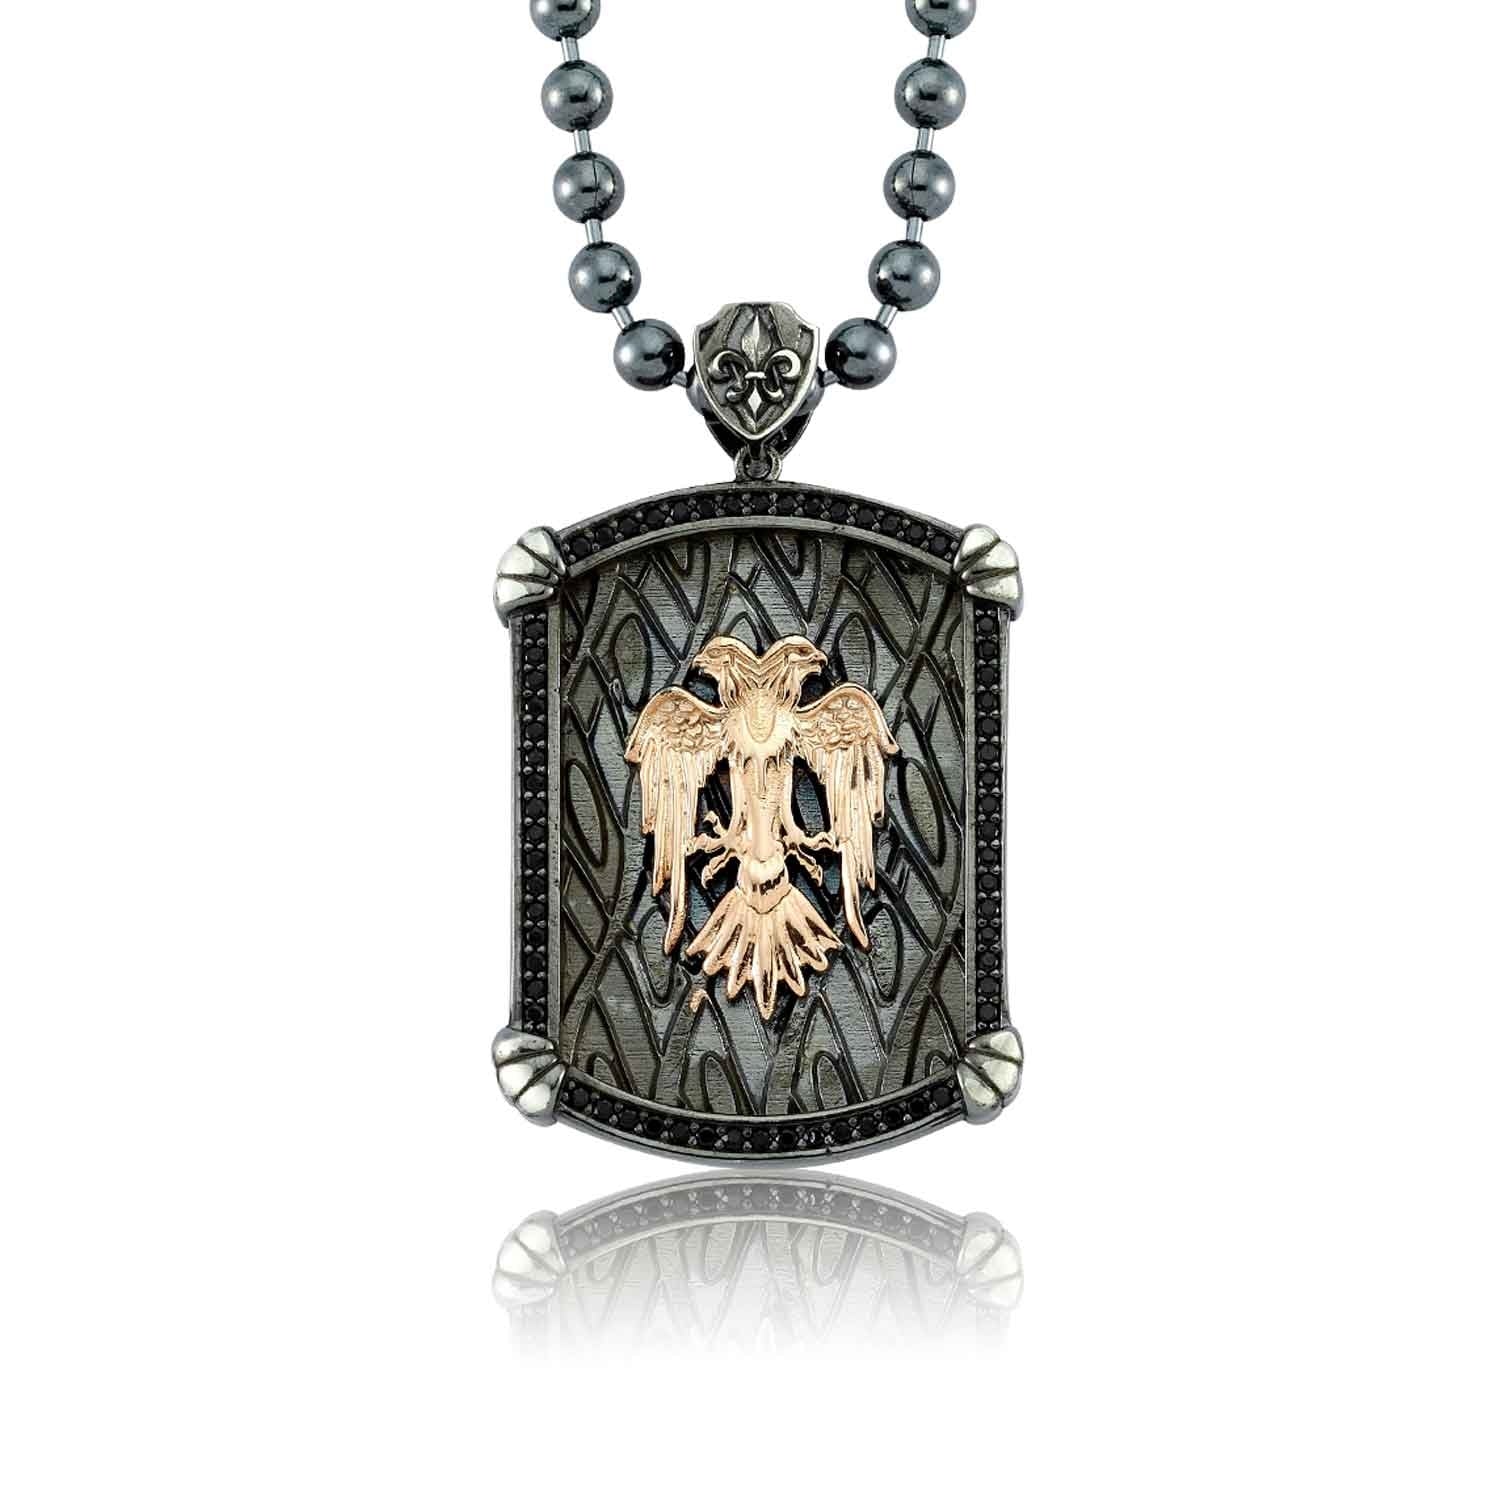 RARE PRINCE by CARAT SUTRA | Unique Designed Eagle Pendant for Men | 925 Sterling Silver Rosegold Plated Oxidized Pendant | Men's Jewelry | With Certificate of Authenticity and 925 Hallmark - caratsutra